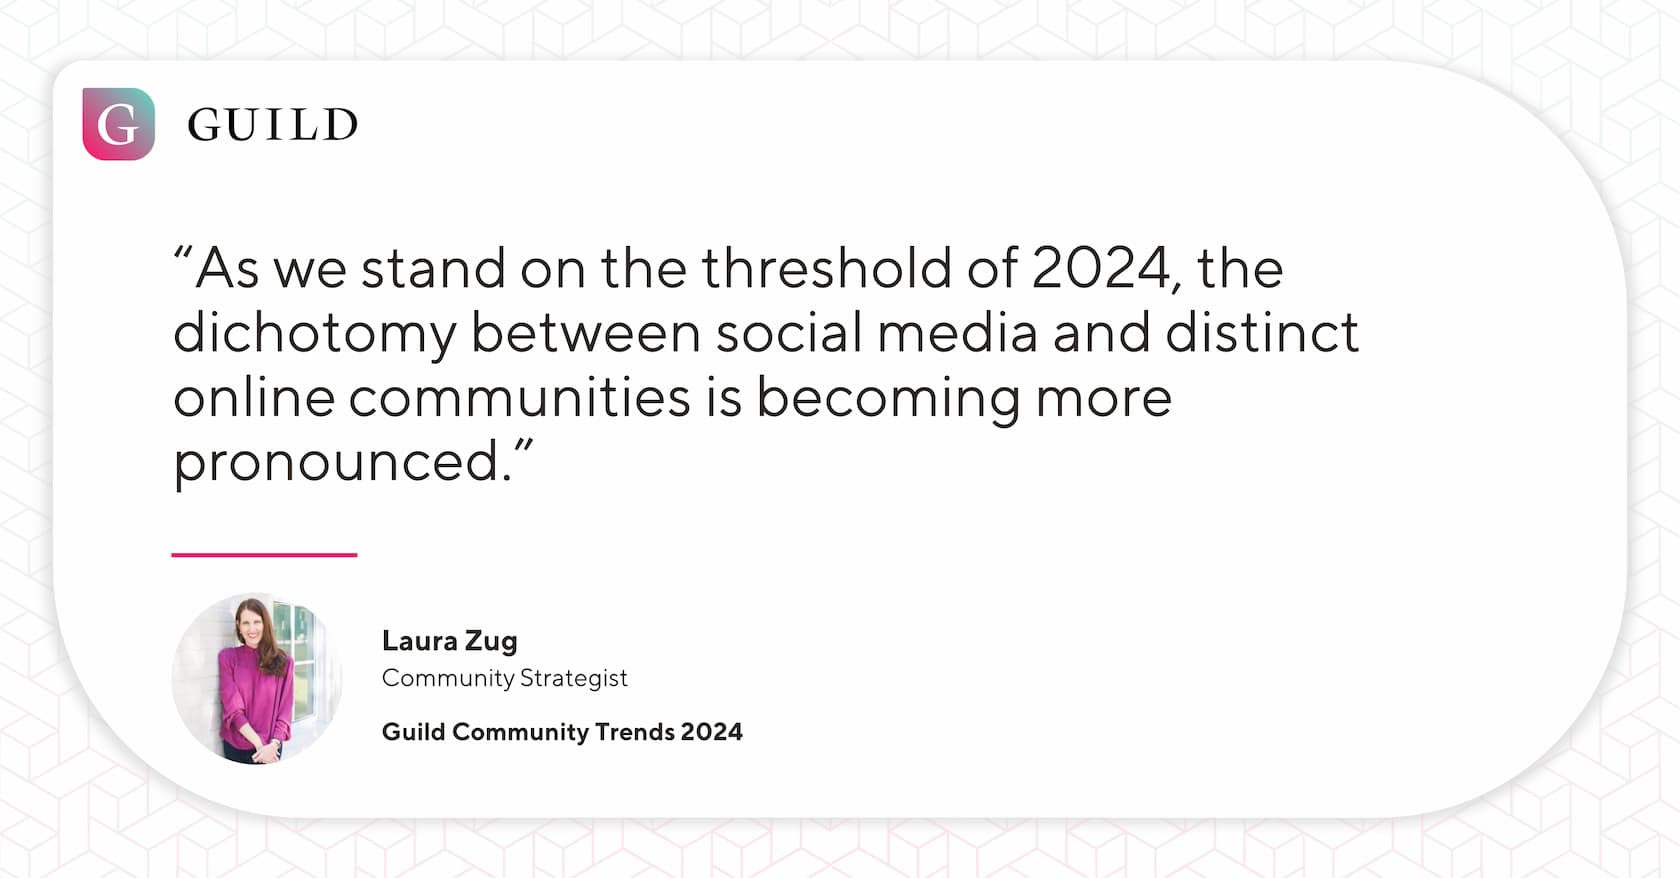 A quote from Laura Zug reading "As we stand on the threshold of 2024, the dichotomy between social media and distinct online communities is becoming more pronounced."